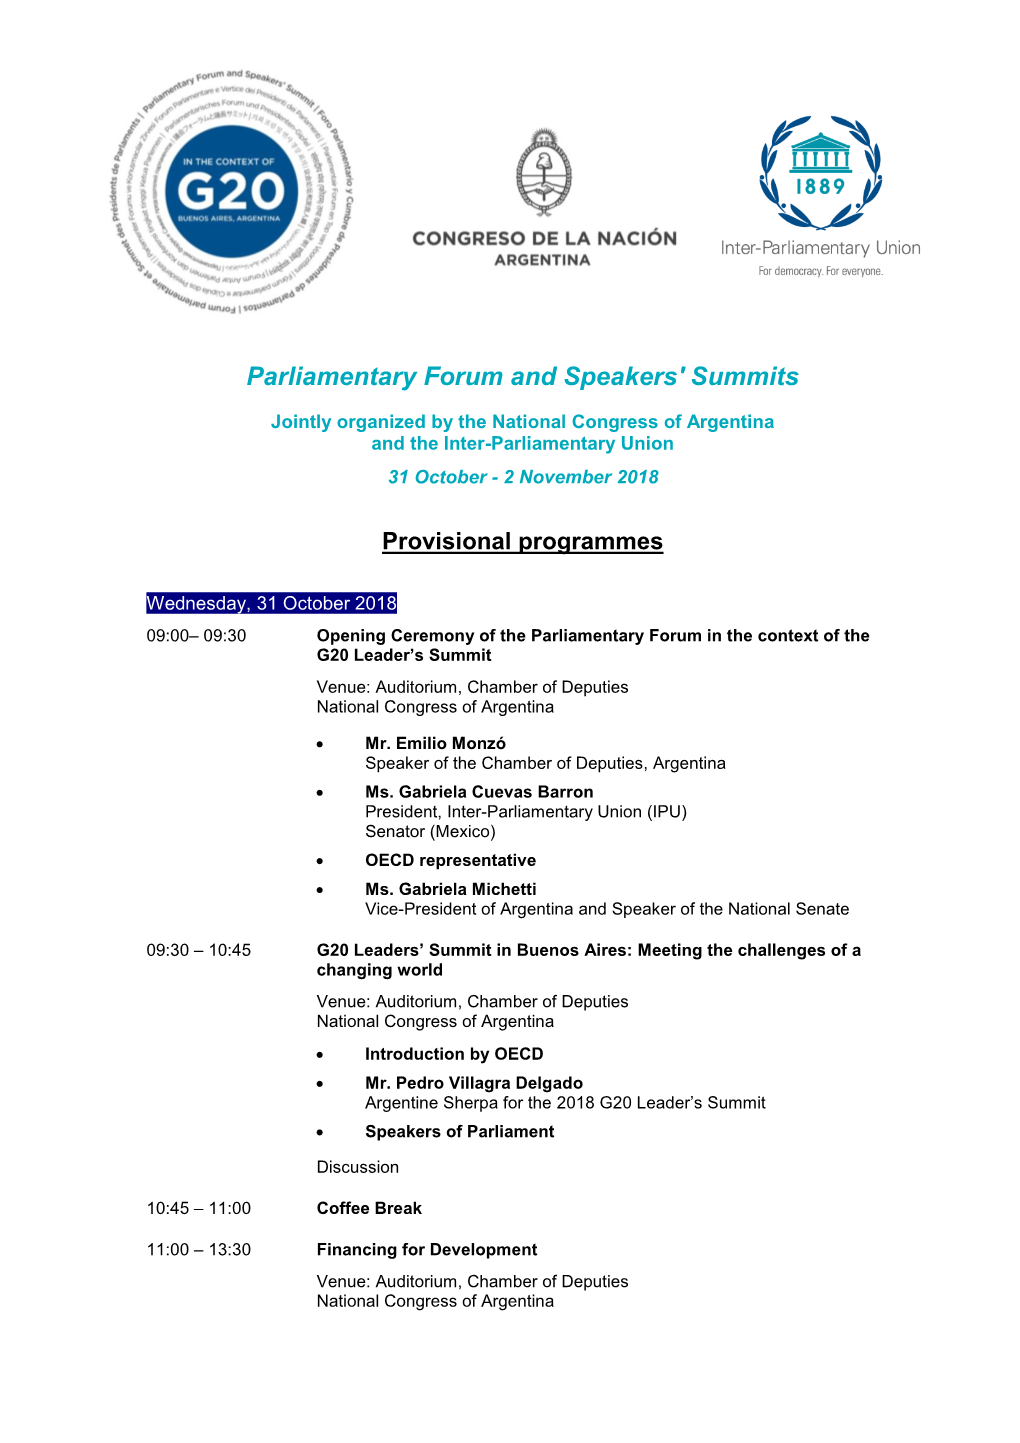 Parliamentary Forum and Speakers' Summits